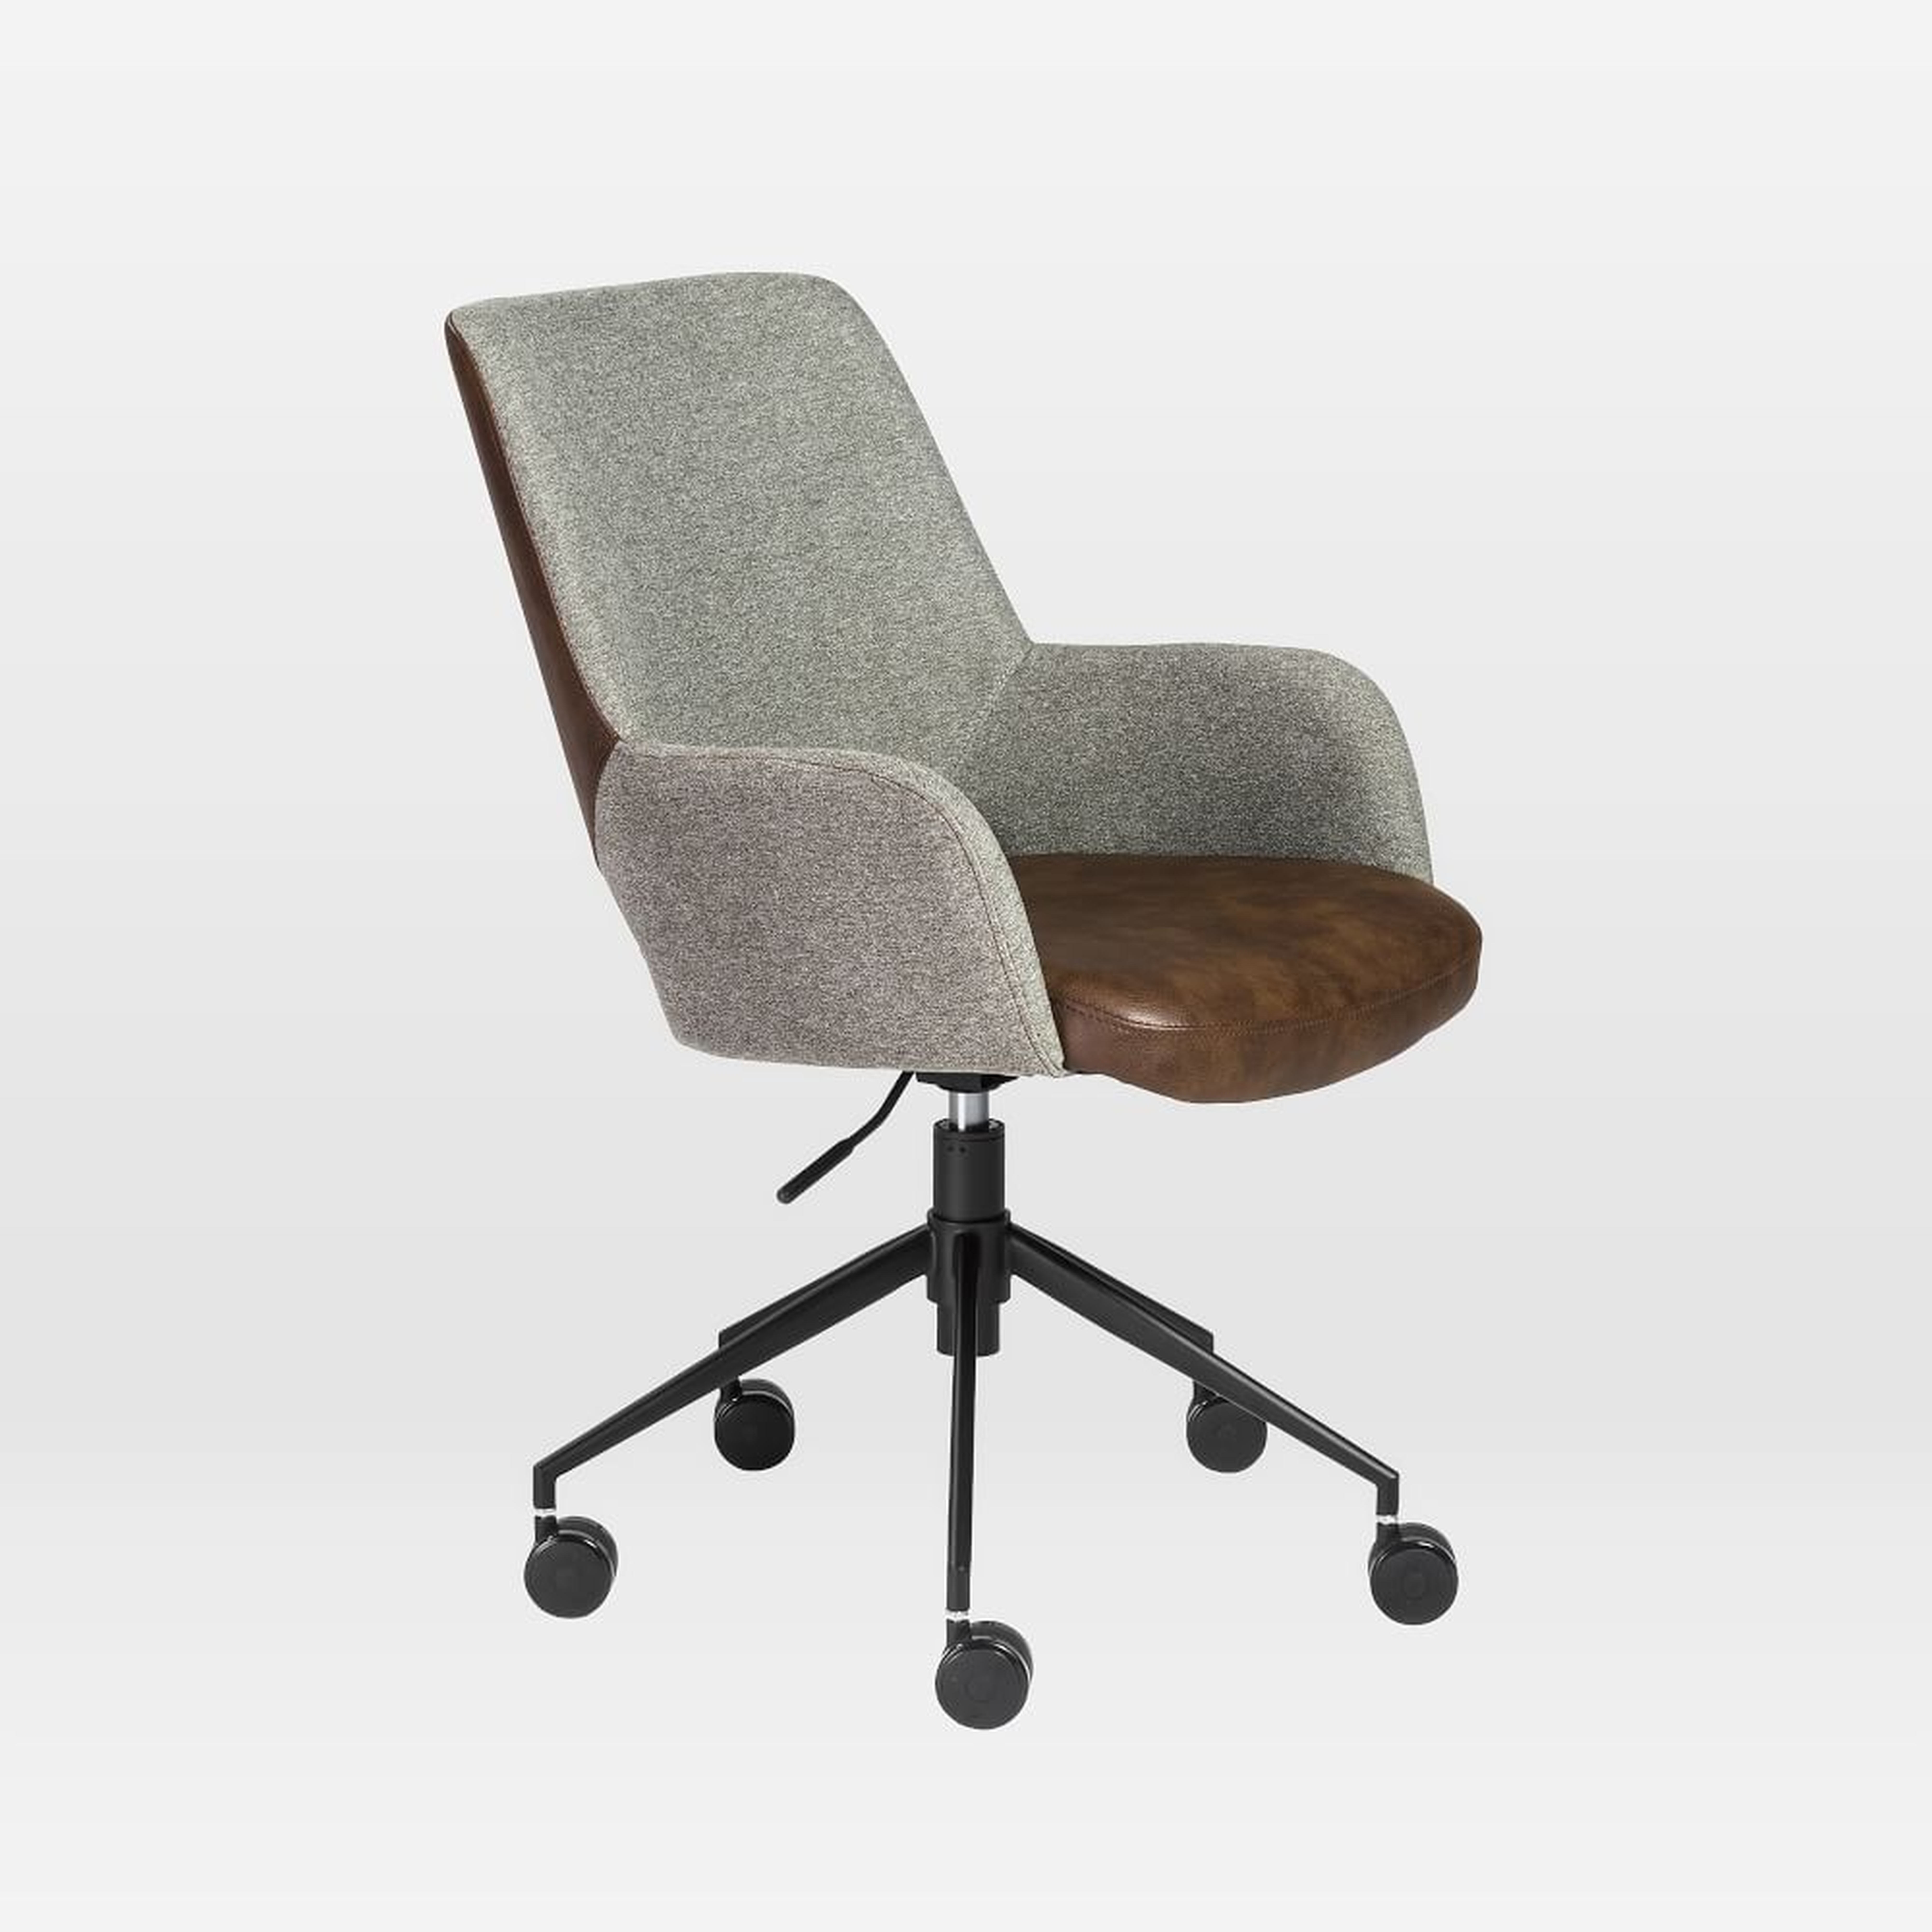 Two-Toned Upholstered Office Chair - Contract Grade - West Elm